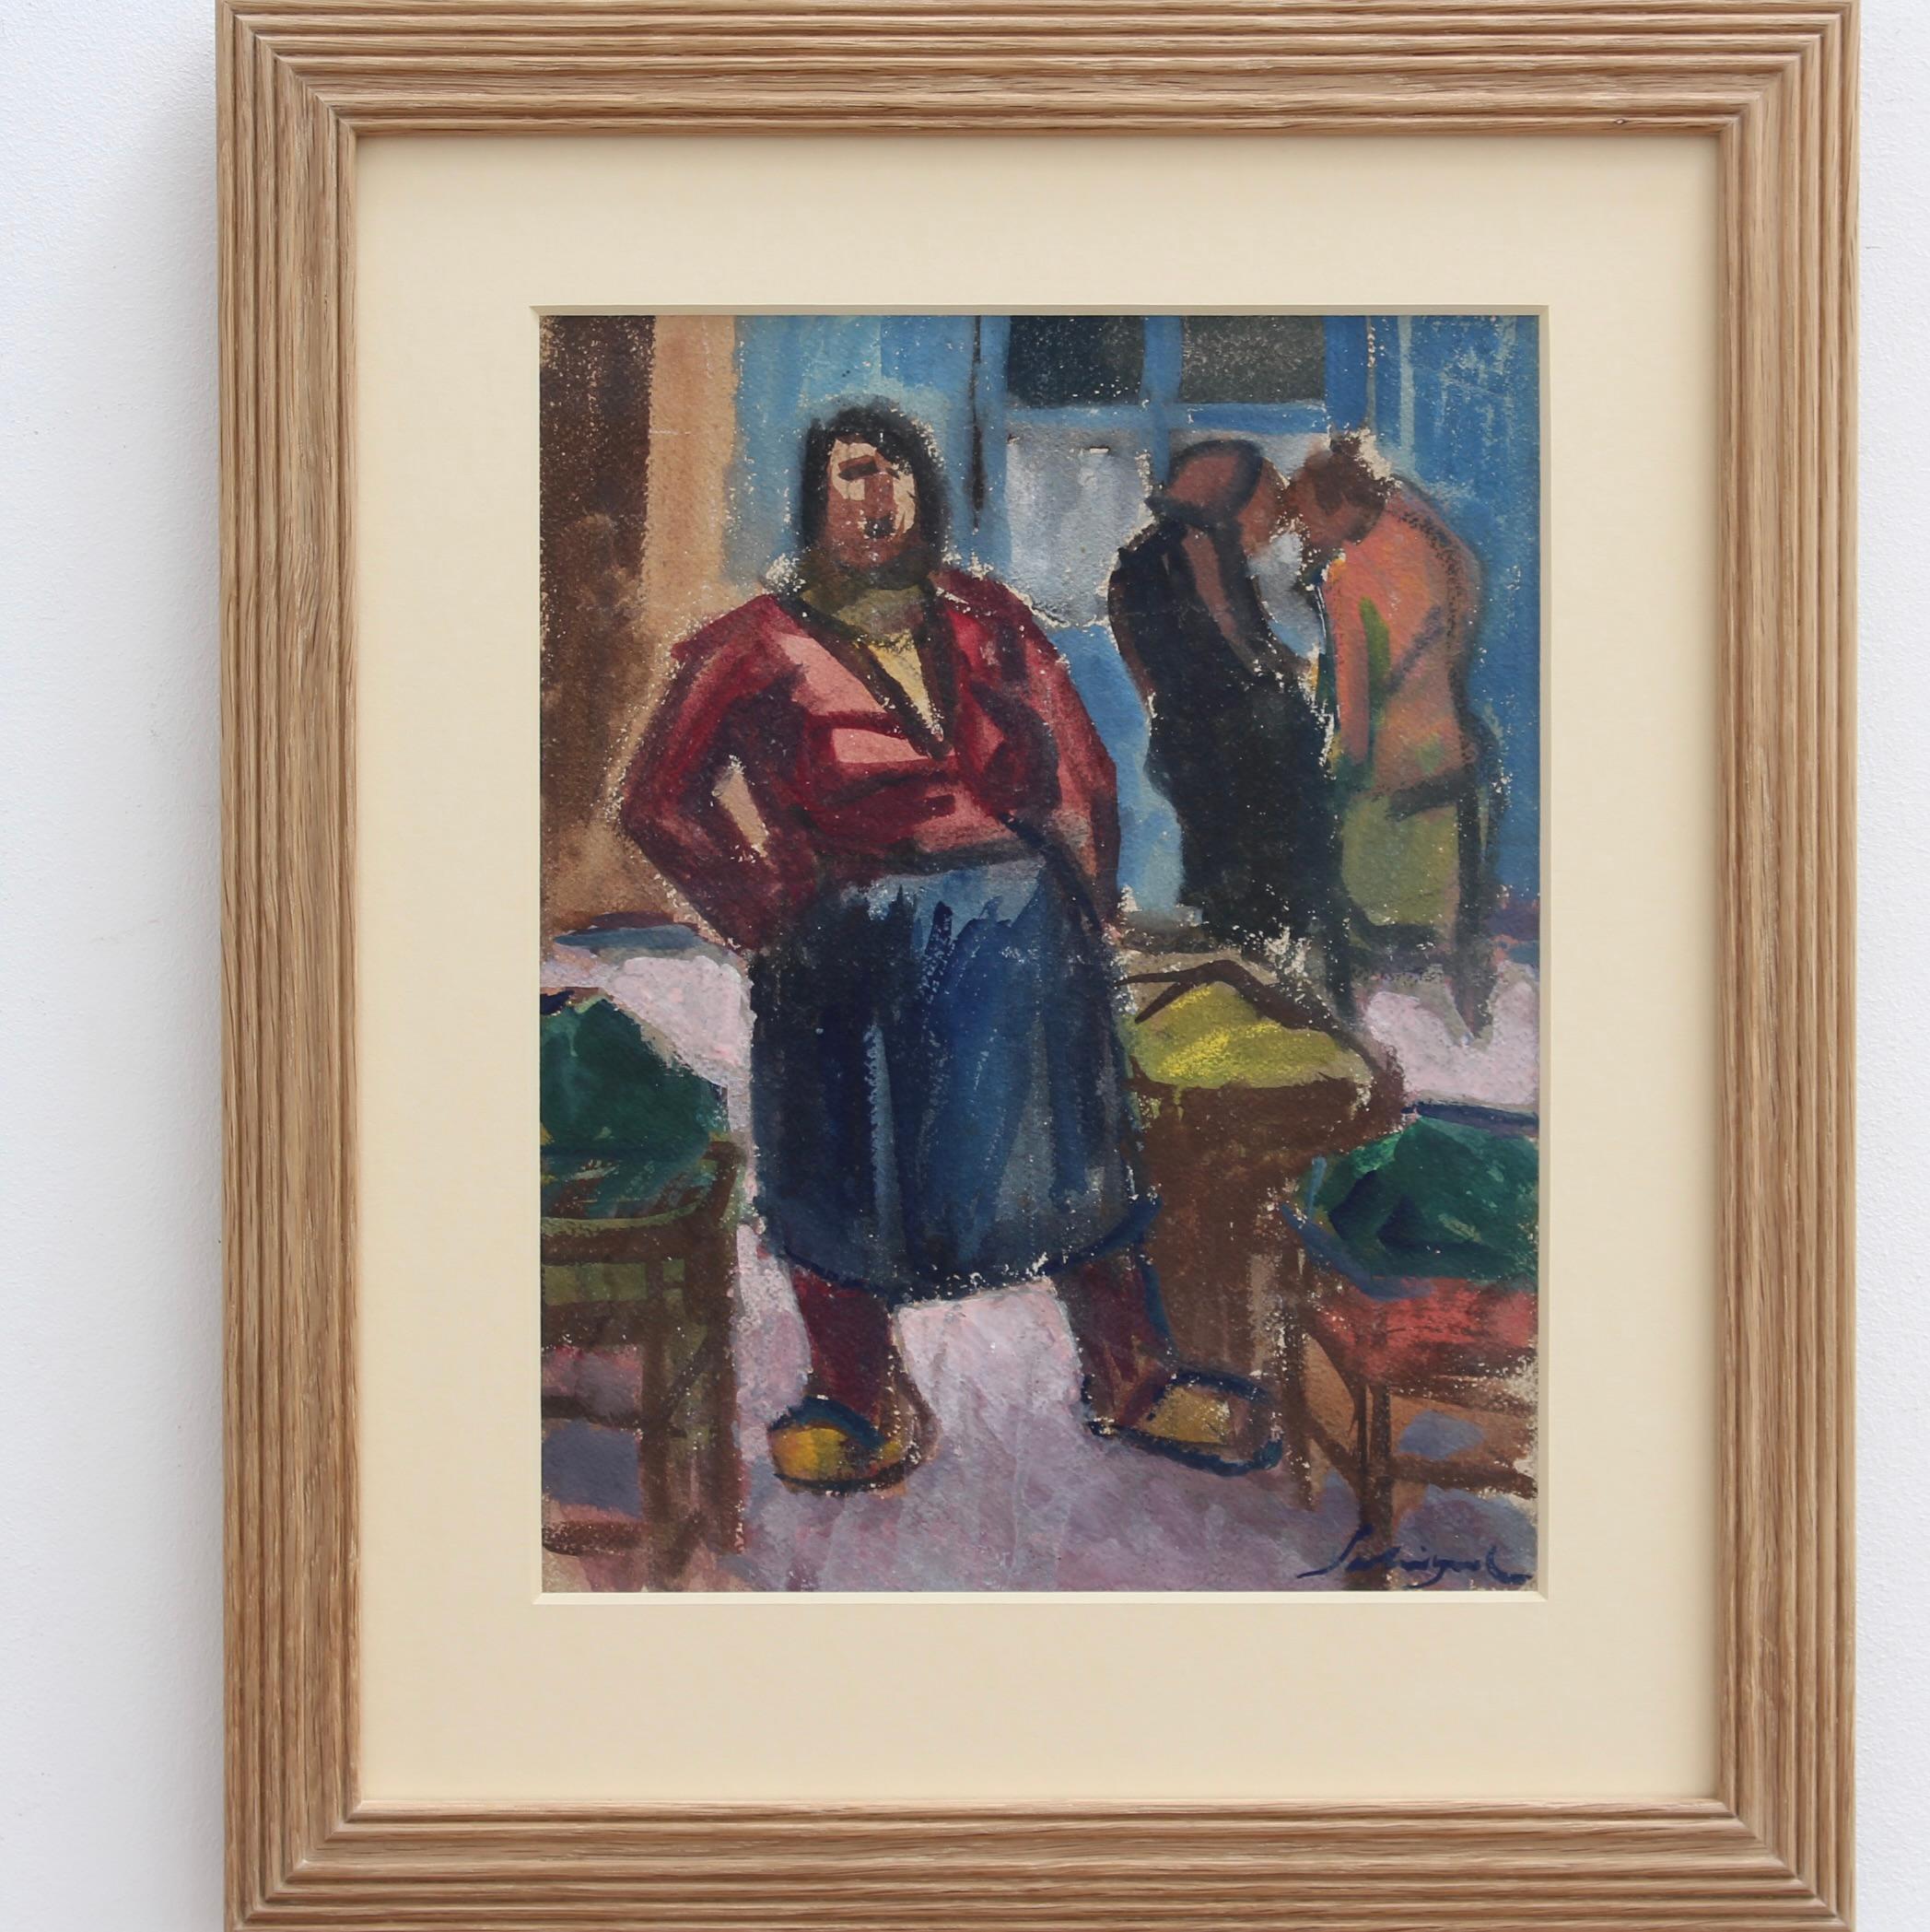 'The Market Seller in Nice', gouache on paper, by Alfred Salvignol (circa 1950s). The role of women as support to their families has been both very important and highly undervalued by small communities in those days. This engaging artwork pays